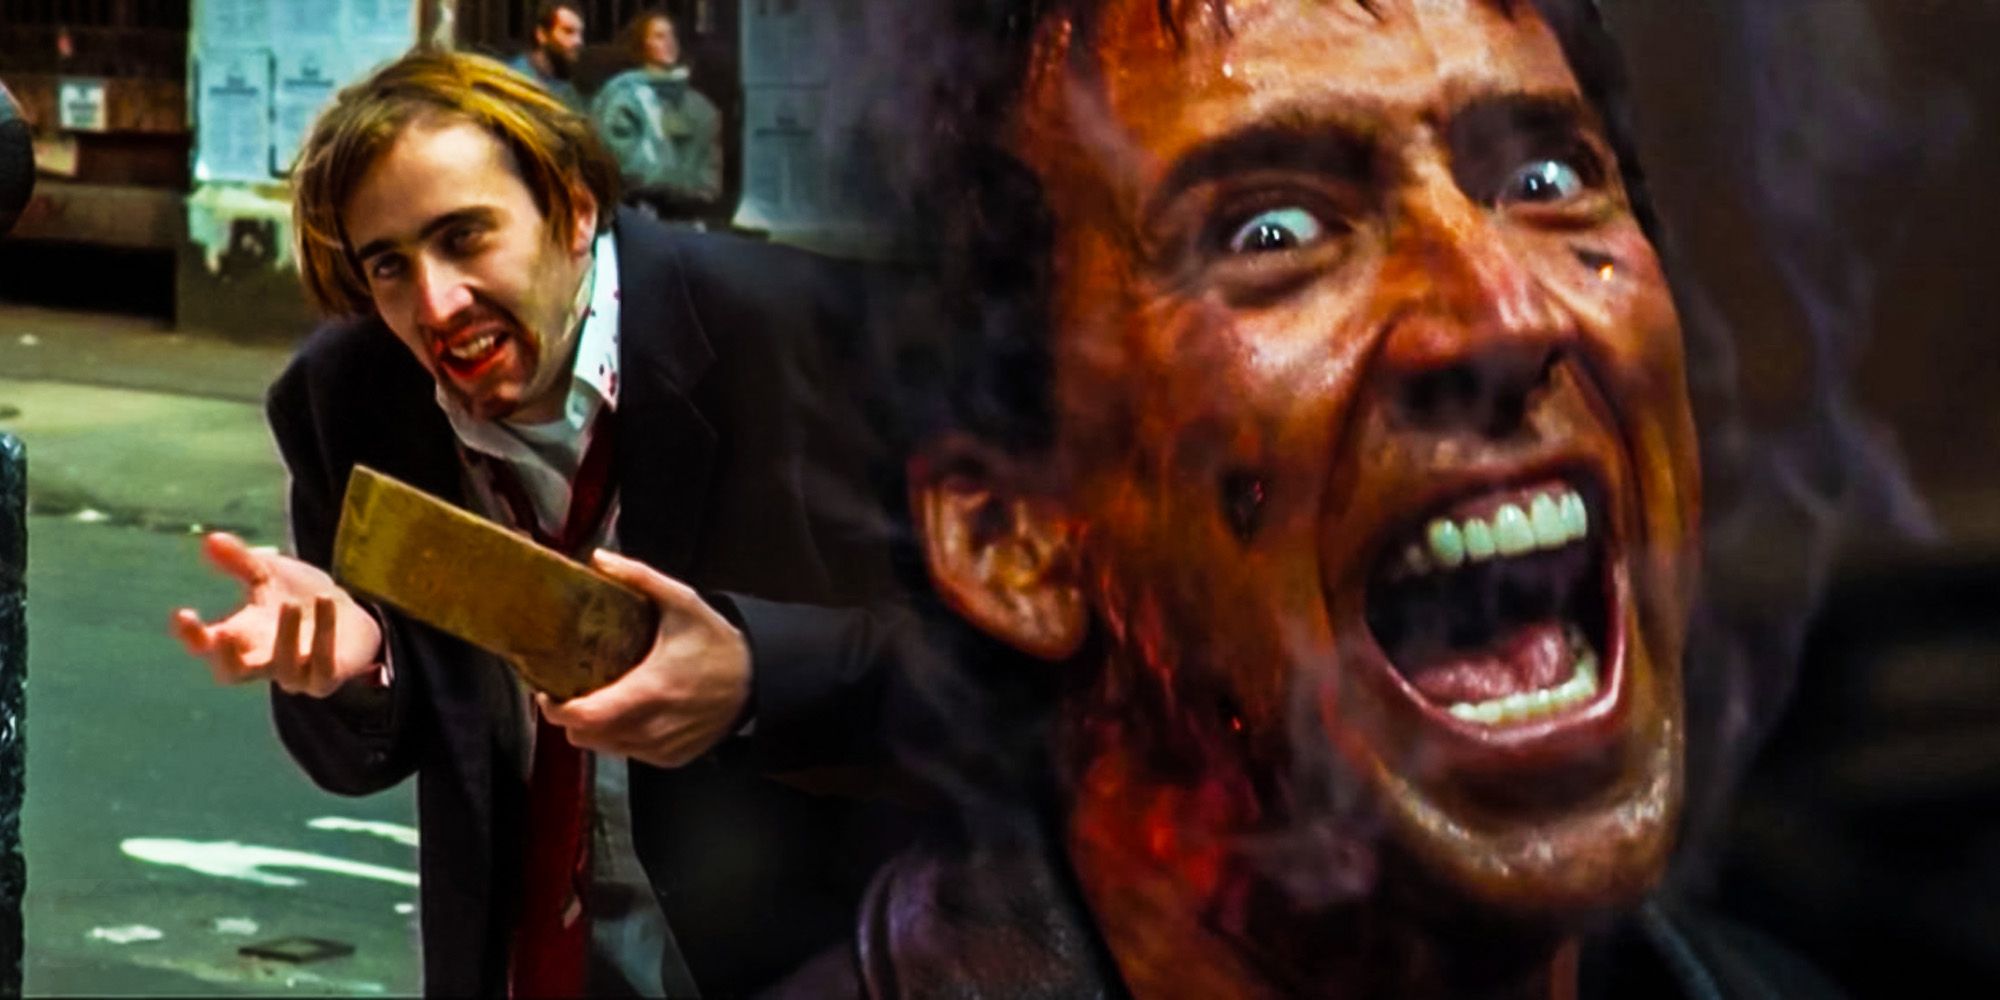 How Nicolas Cage reinvented overacting